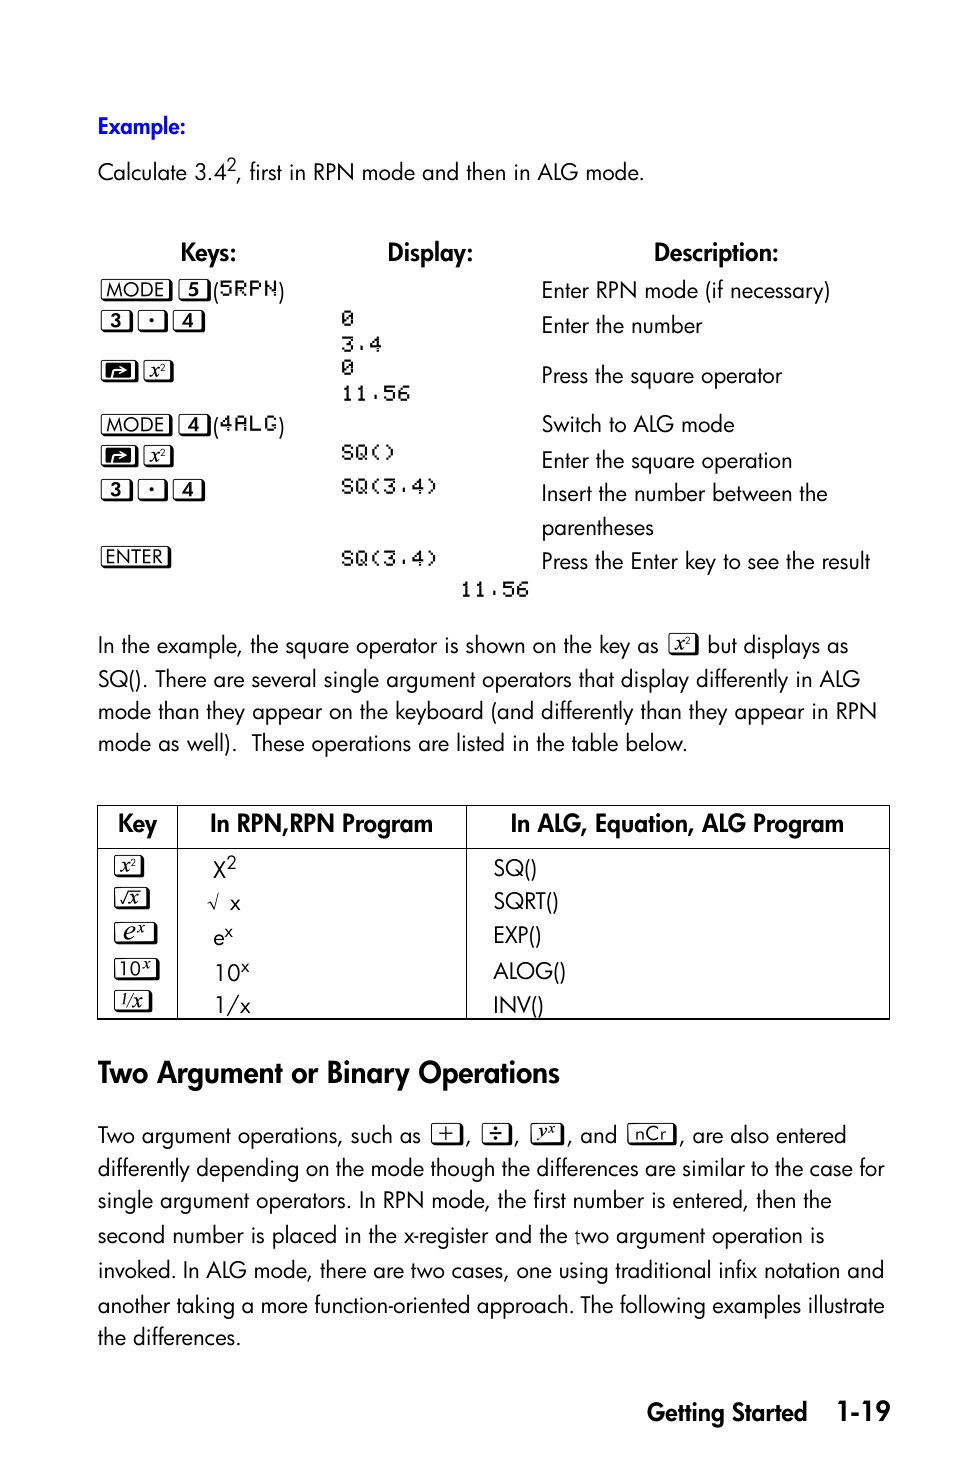 Two argument or binary operations | HP 35s Scientific Calculator User Manual | Page 35 / 382